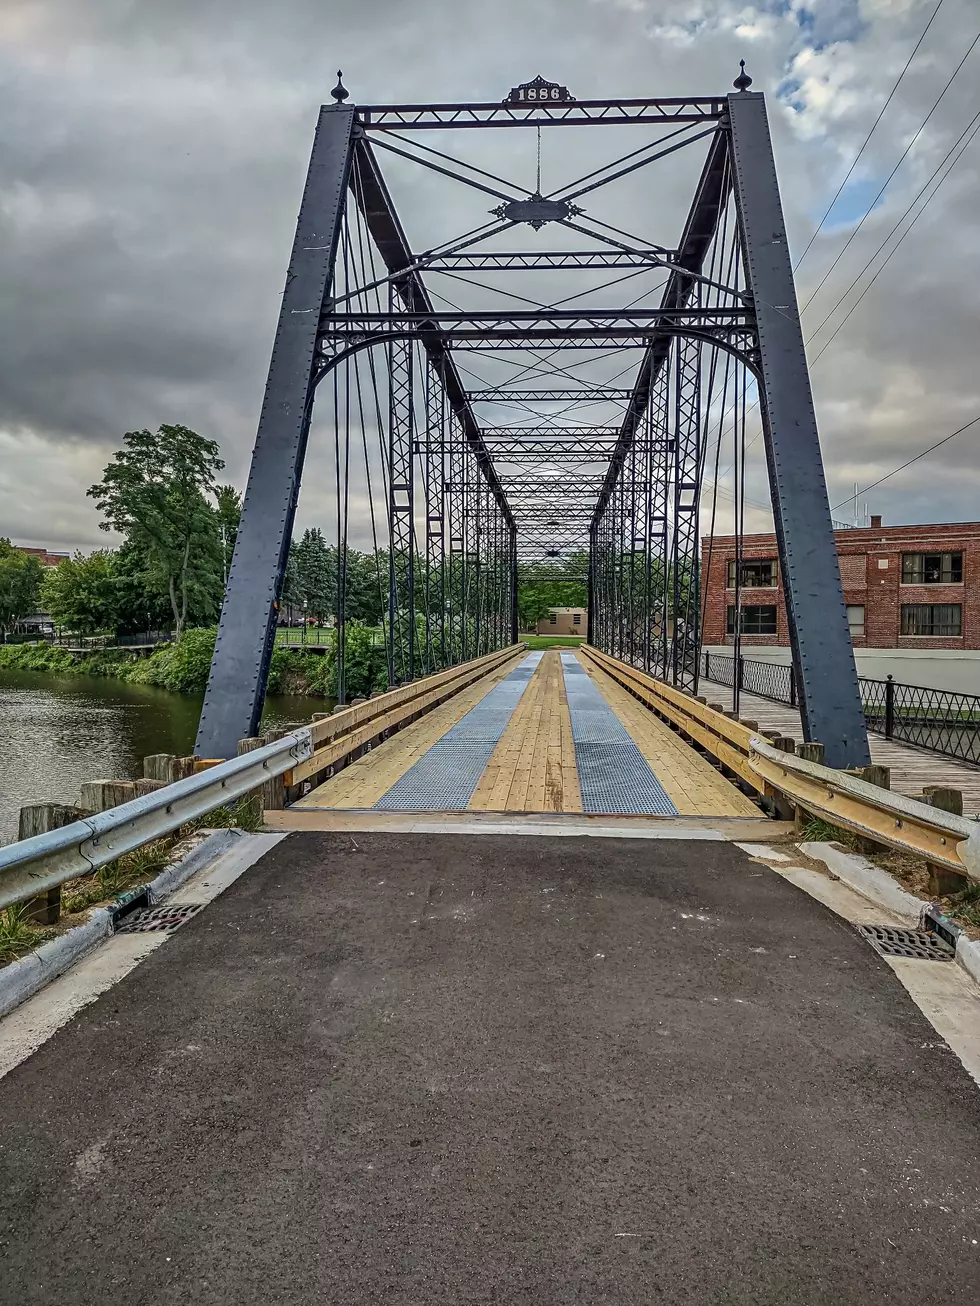 After 4 Month Closure Allegan's Iron Bridge Reopens to Traffic